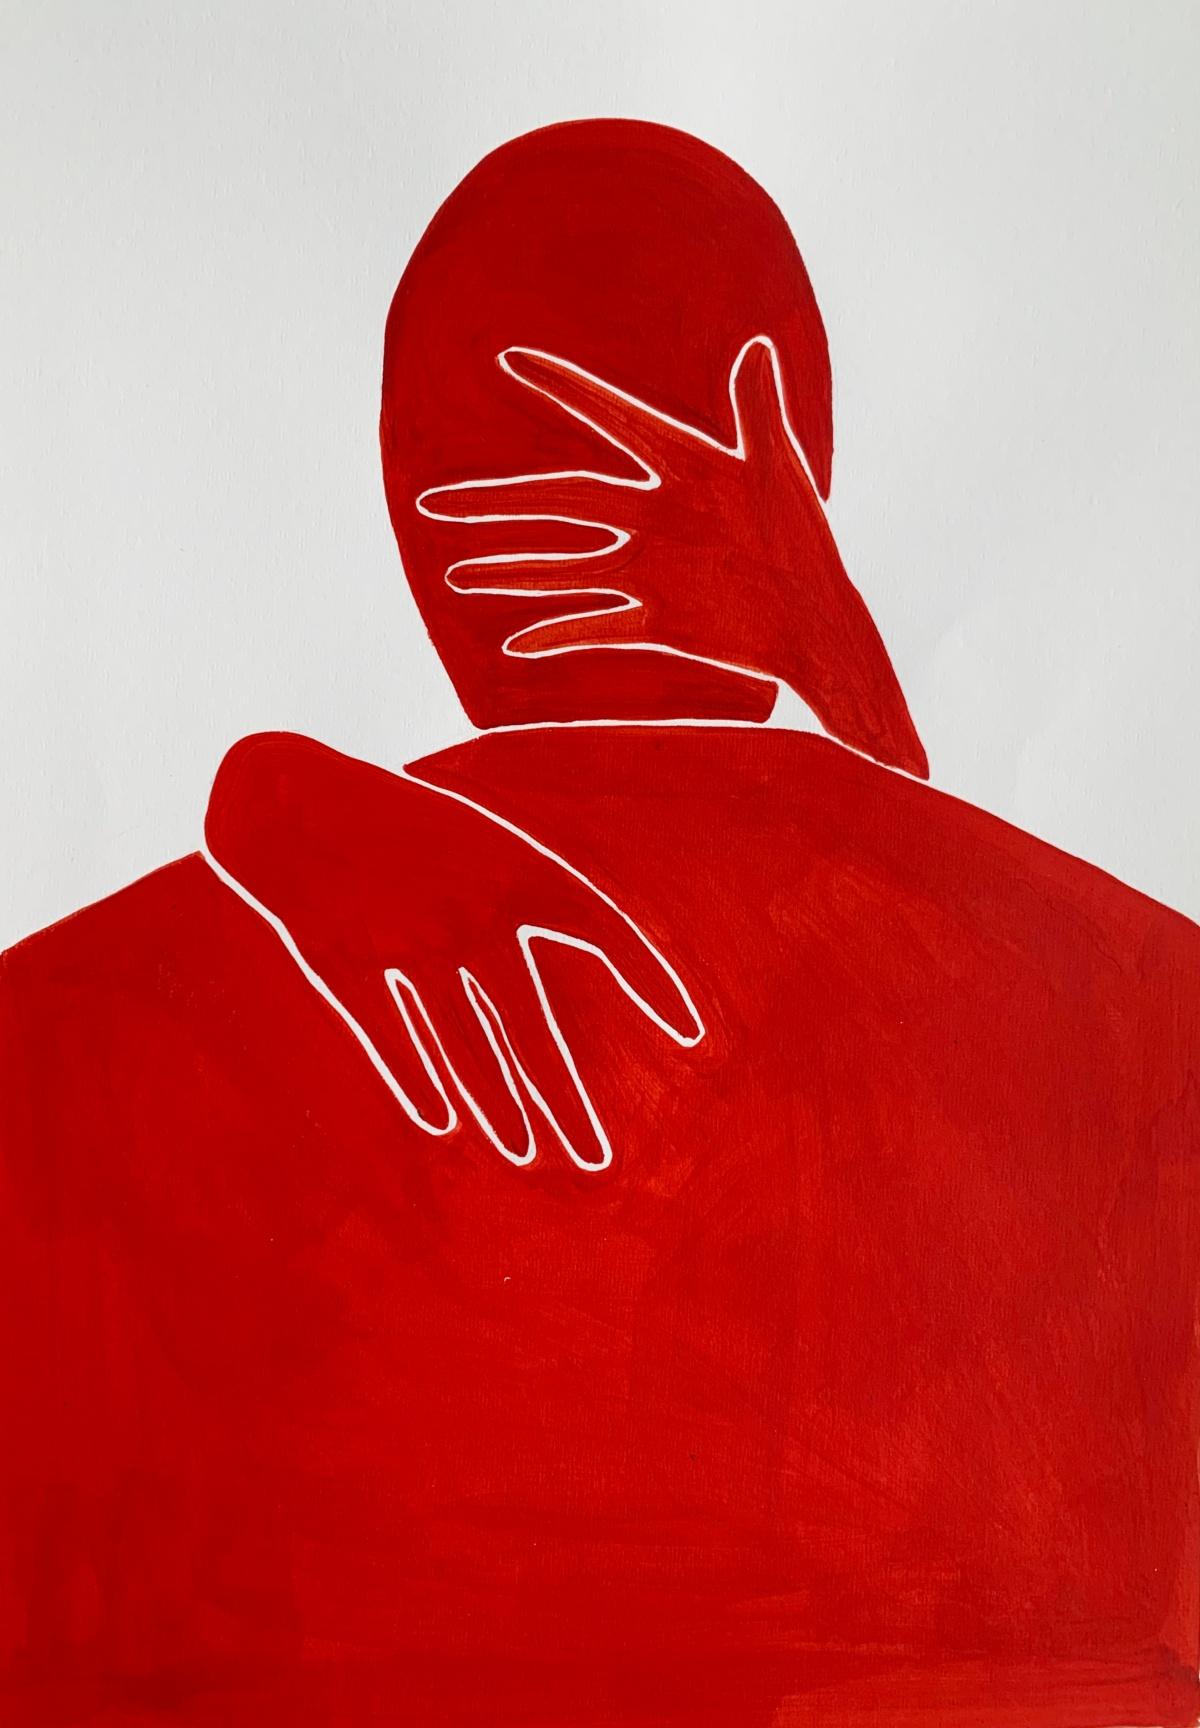 Figurative acrylic on paper painting by young professional European artist Waleria Matelska. Artwork is minimalist and composed with synthetic shapes. Painting is vibrant- main color is red. One figure is visible standing from the back and there are